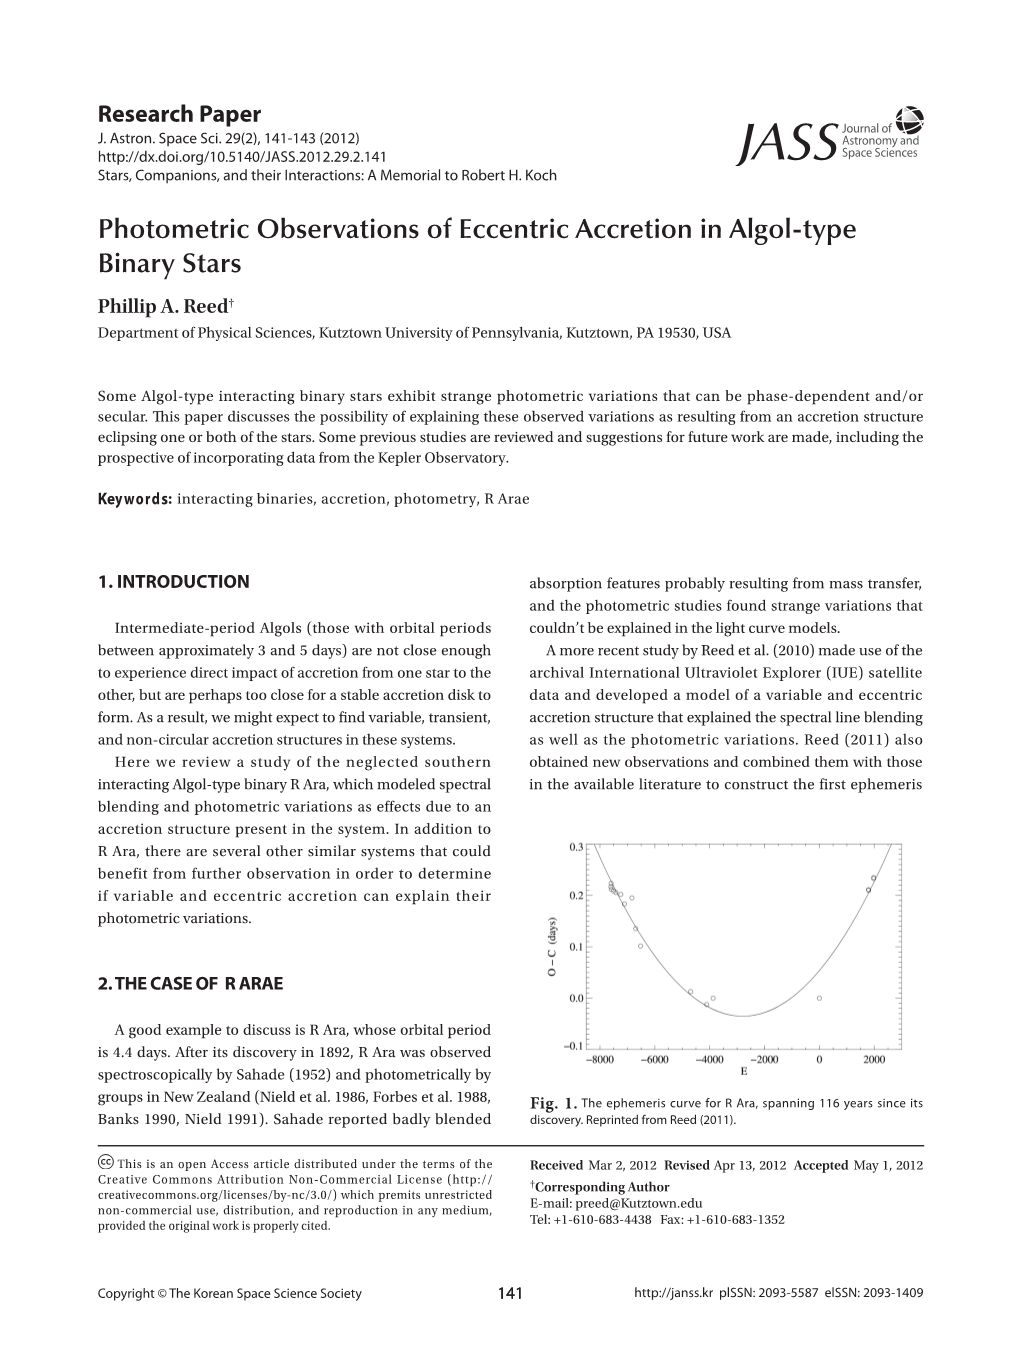 Photometric Observations of Eccentric Accretion